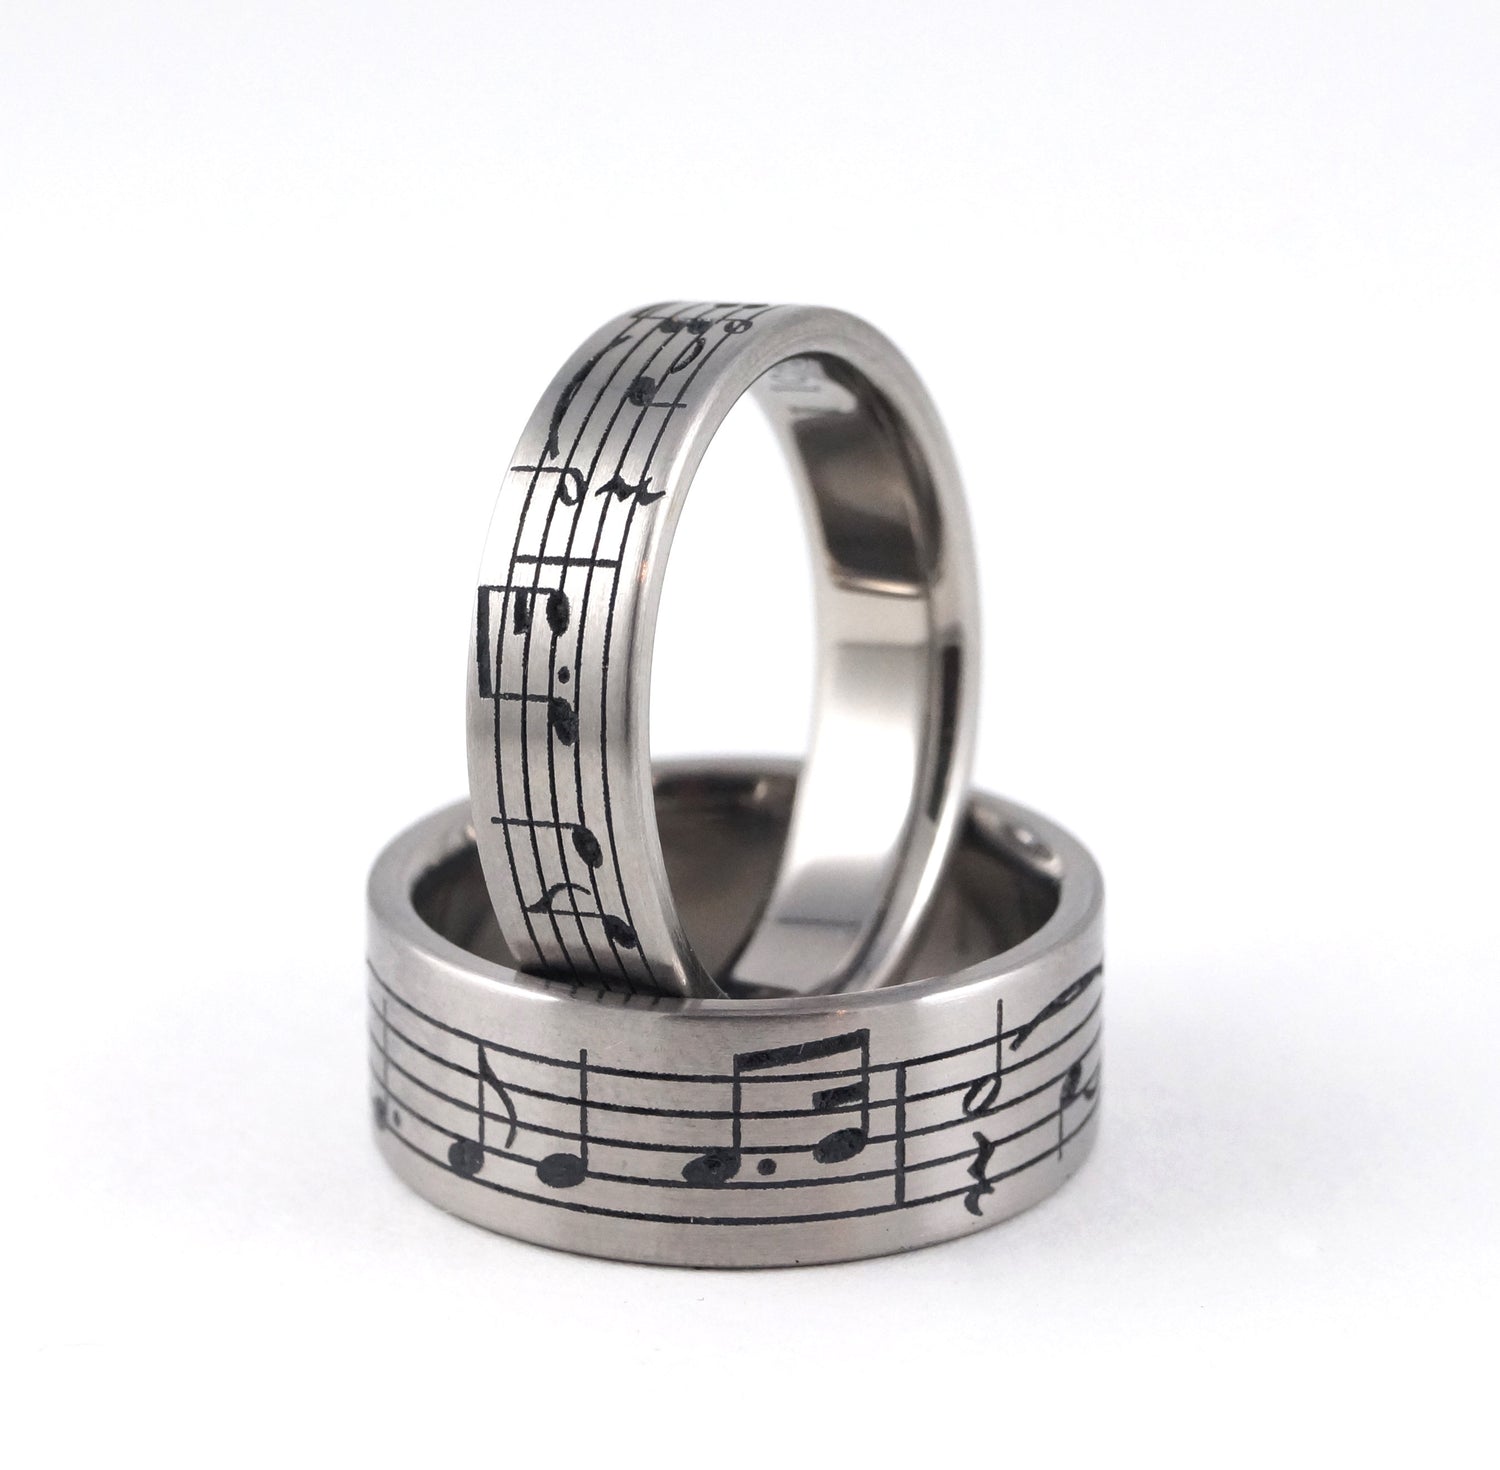 Custom Titanium Music Note Wedding Ring Set 2 Rings Unique Wedding band Music Gifts for him Geekery Alternative Non Traditional Custom Notes